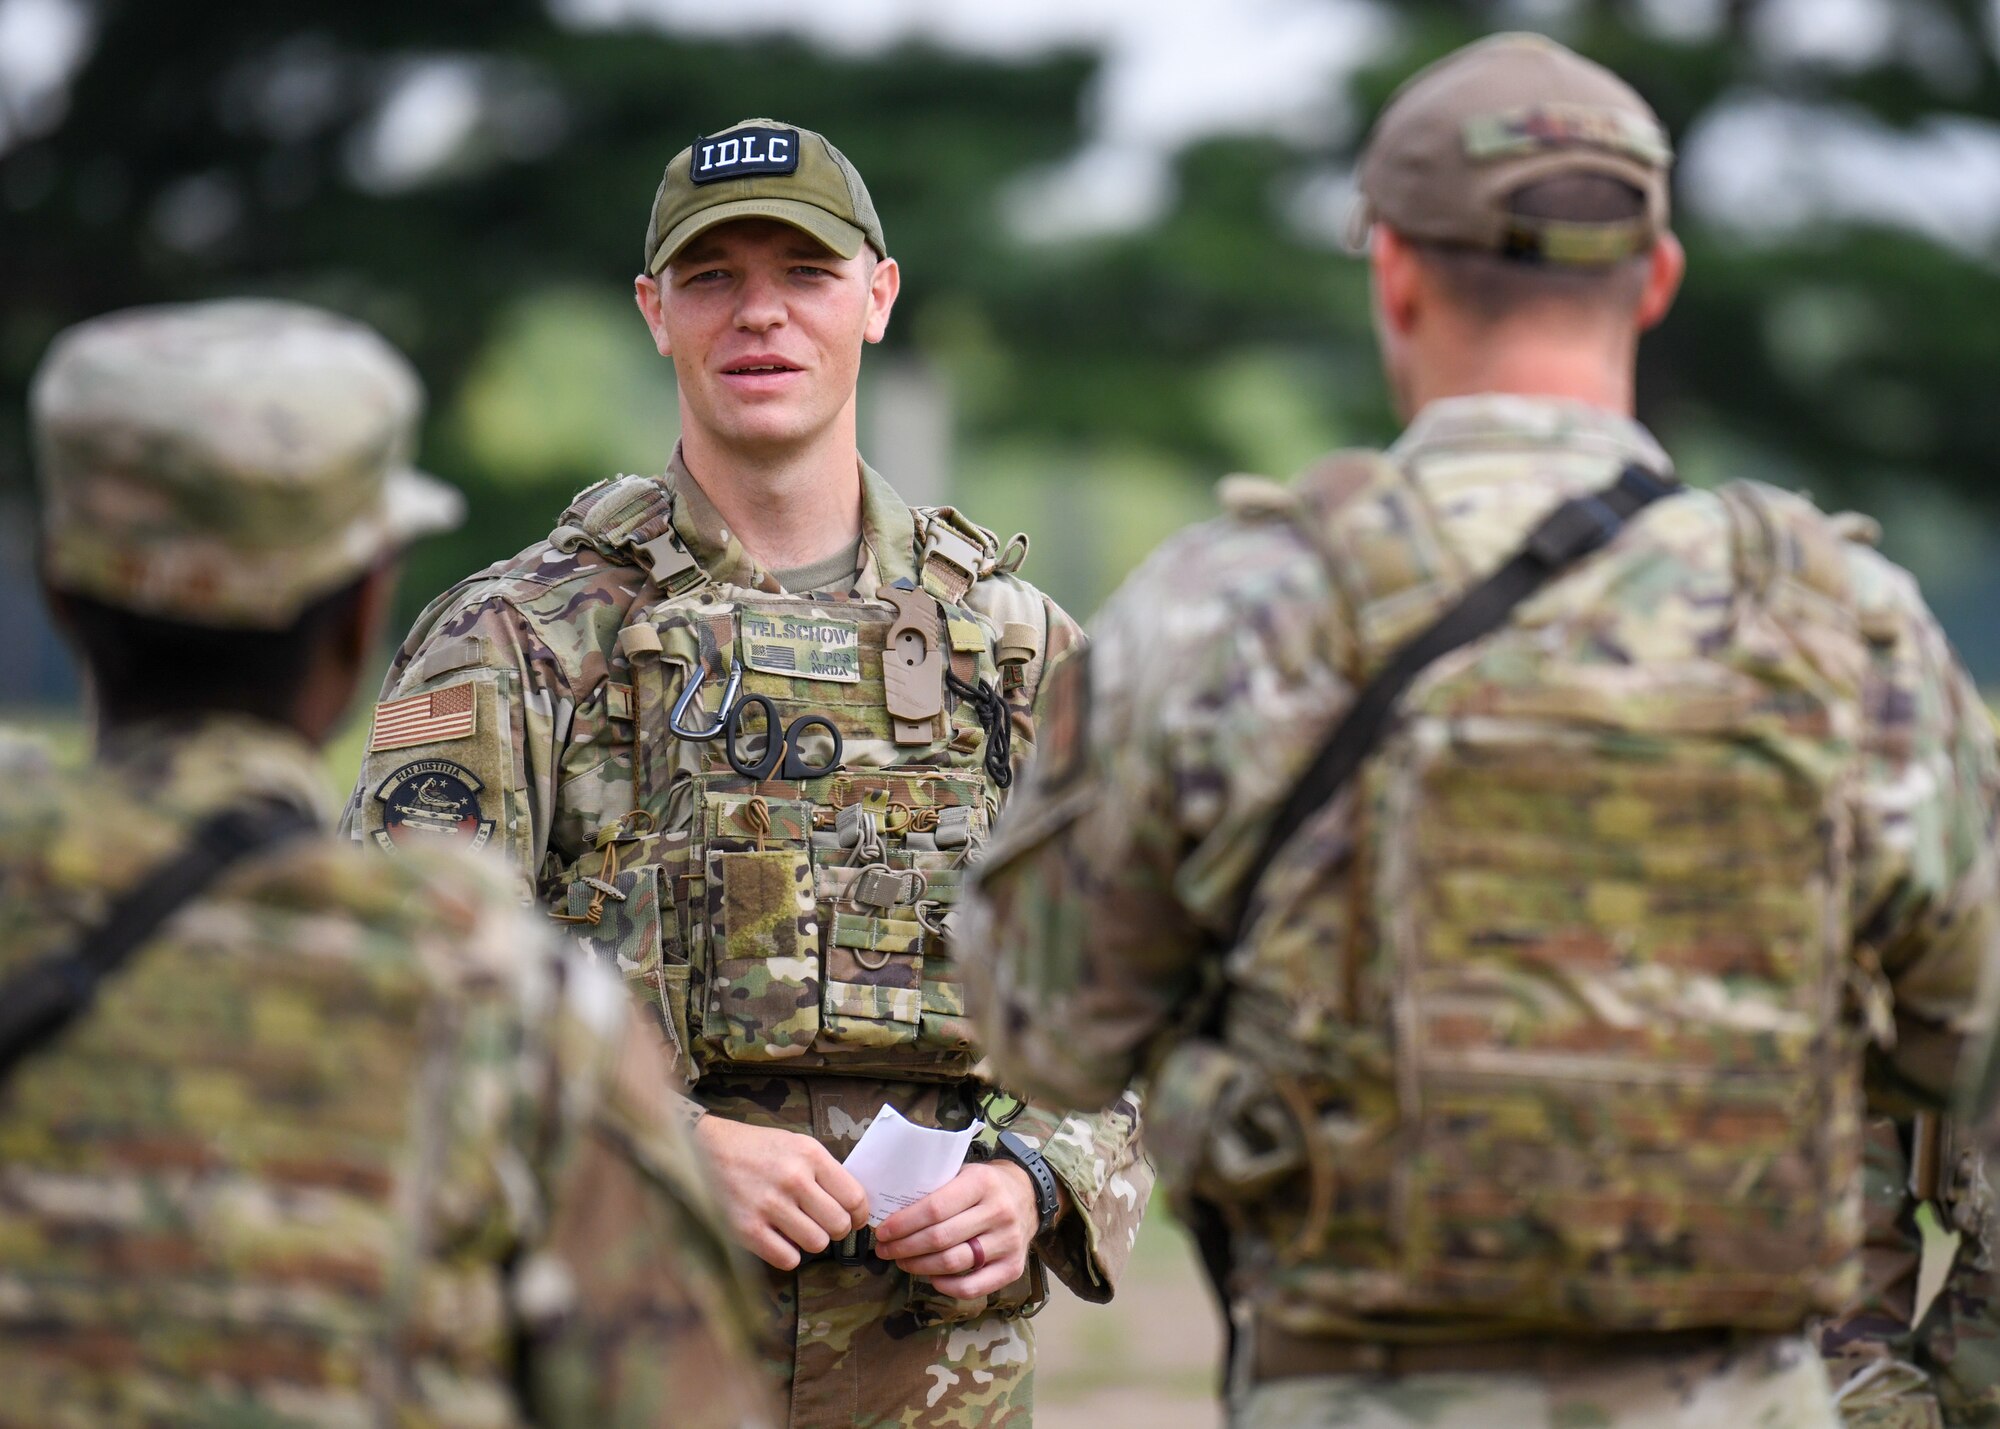 The Integrated Defense Leadership Course provides Reserve Defenders with intensely focused hands-on training to achieve and maintain combat readiness.